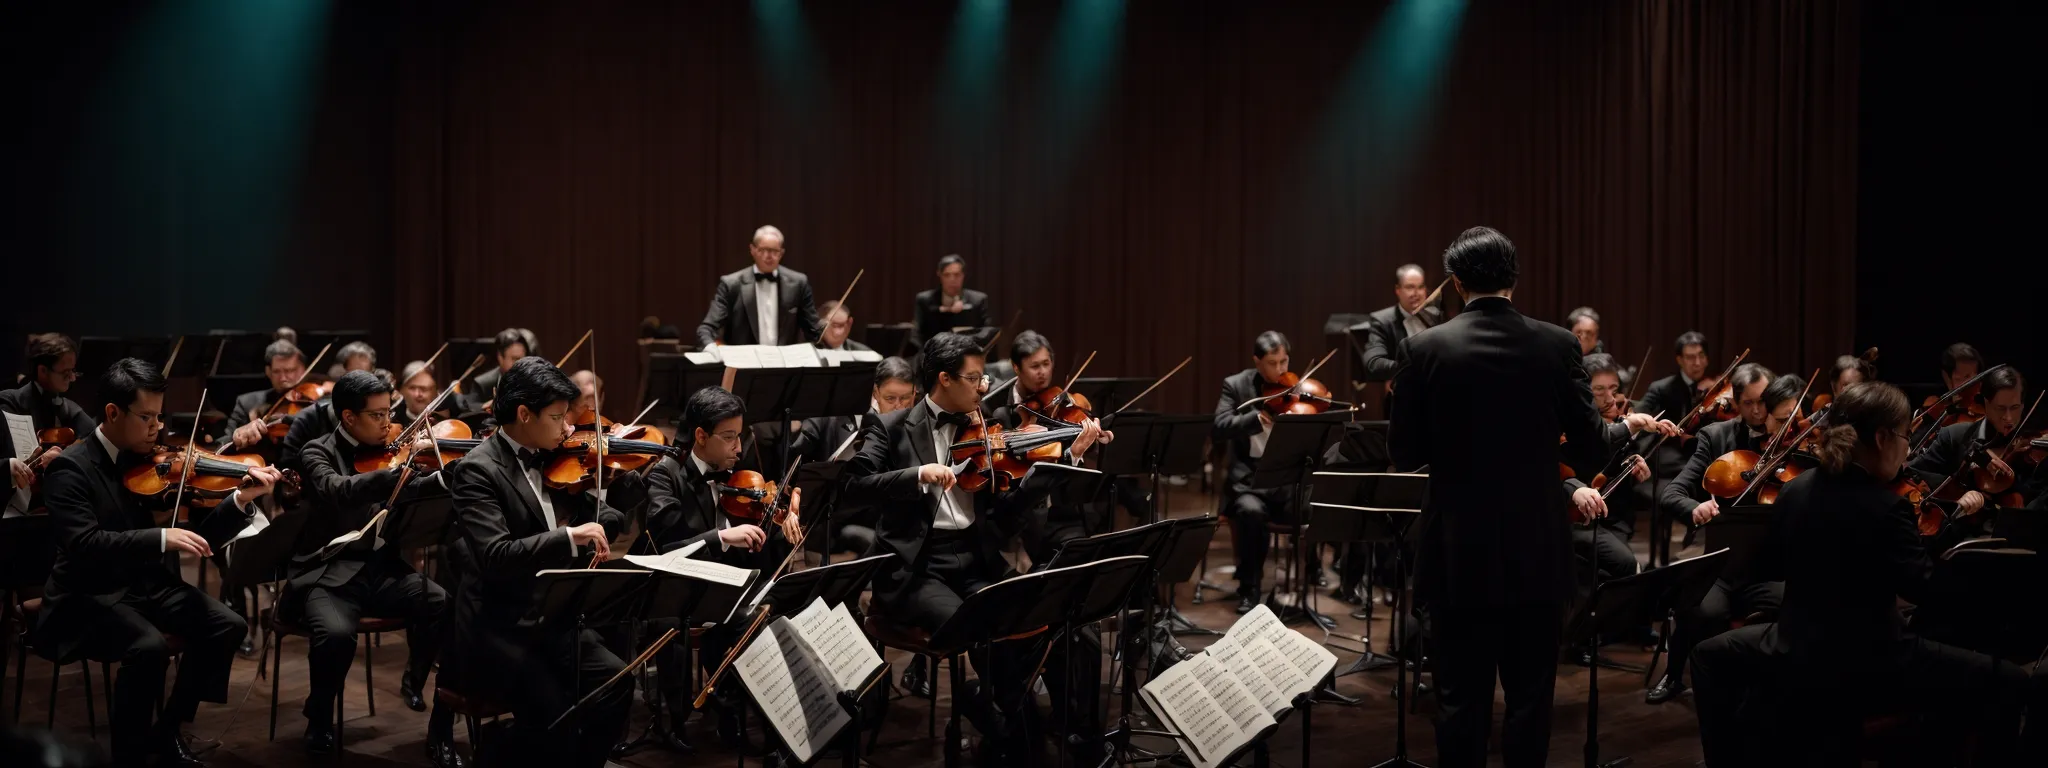 A Maestro Leads An Orchestra On Stage Under A Grand Spotlight.